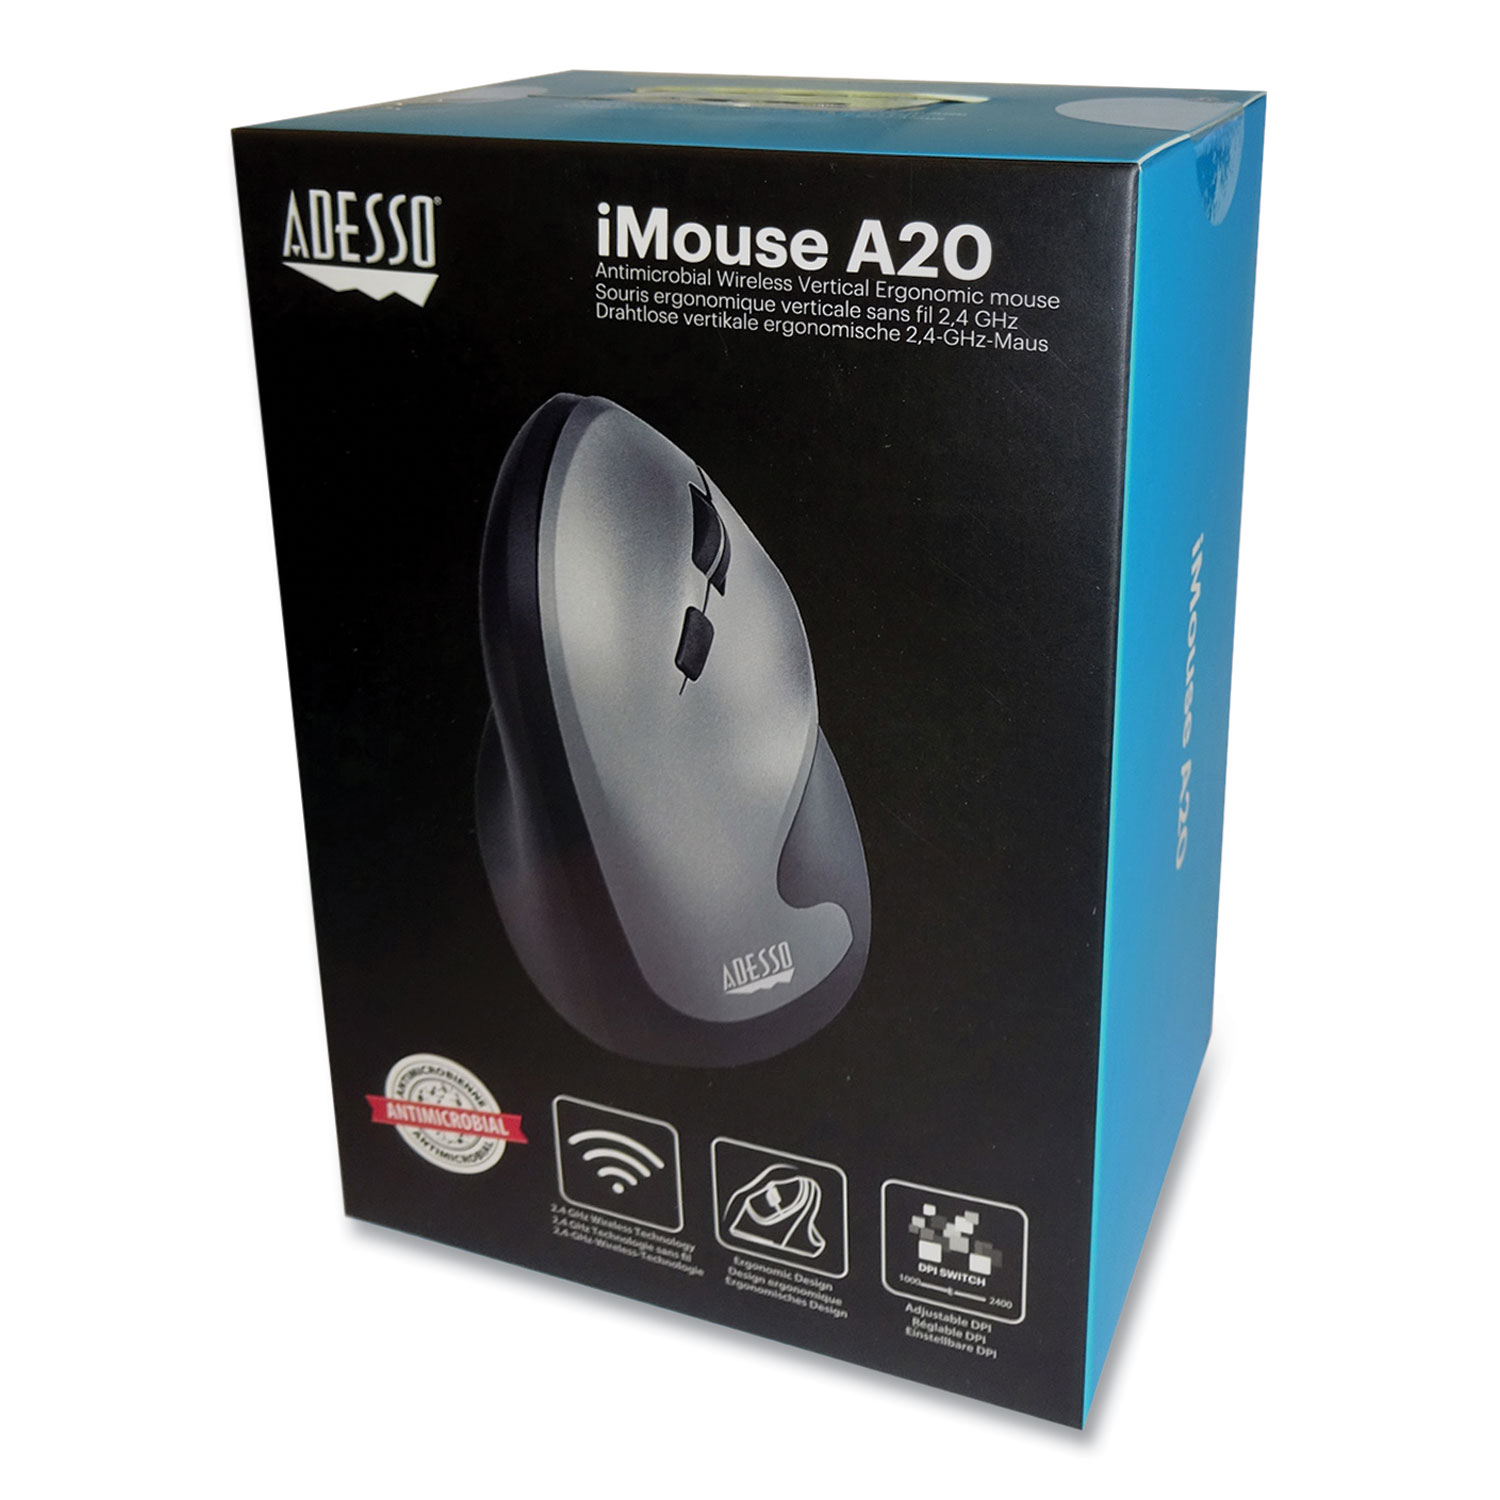 Contour RollerMouse Red Laser Wireless 2800 dpi Scroll Wheel 6